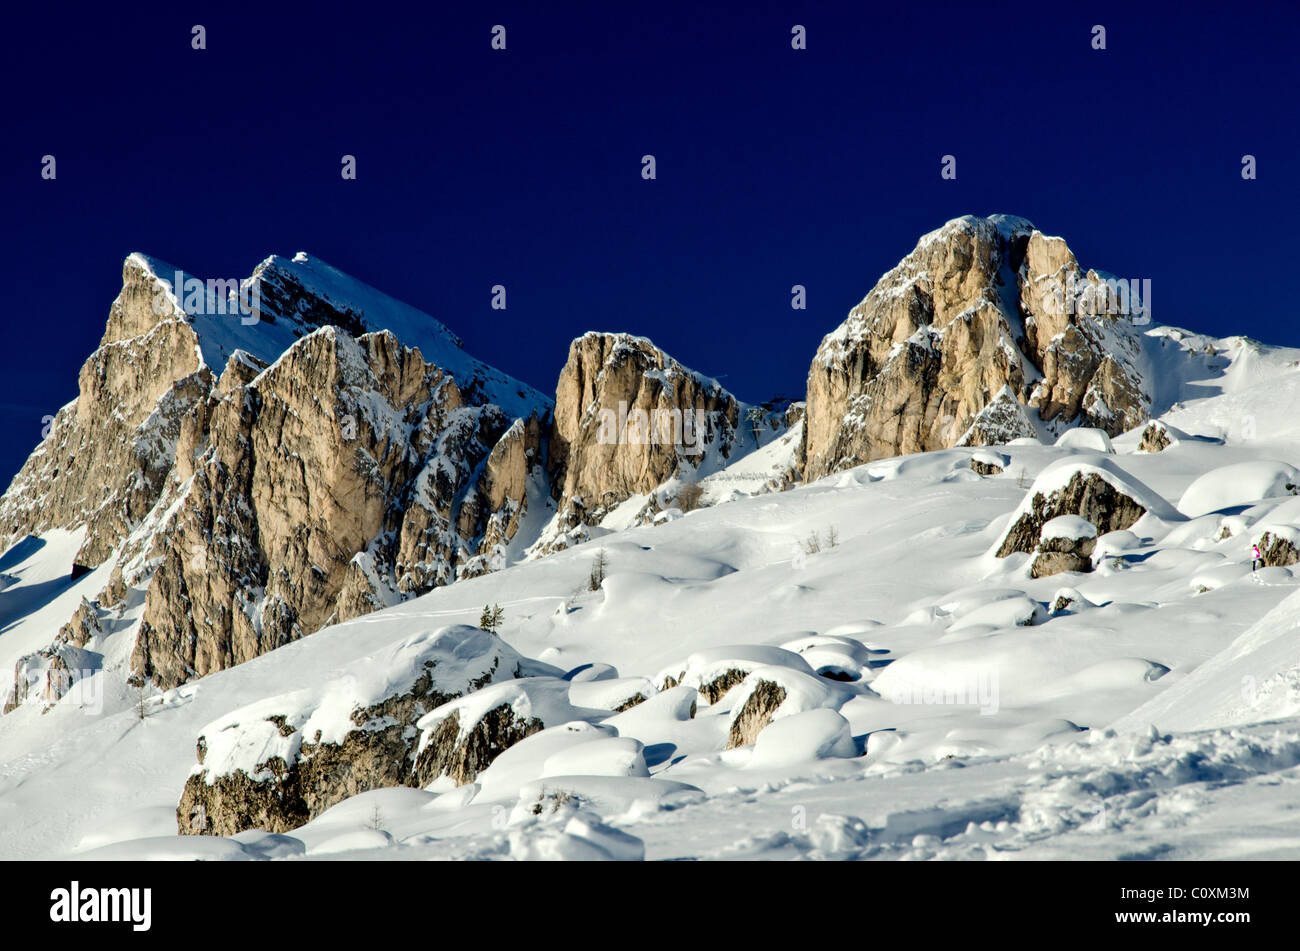 Snowy Landscape of Dolomites Mountains during Winter Season, Italy Stock Photo